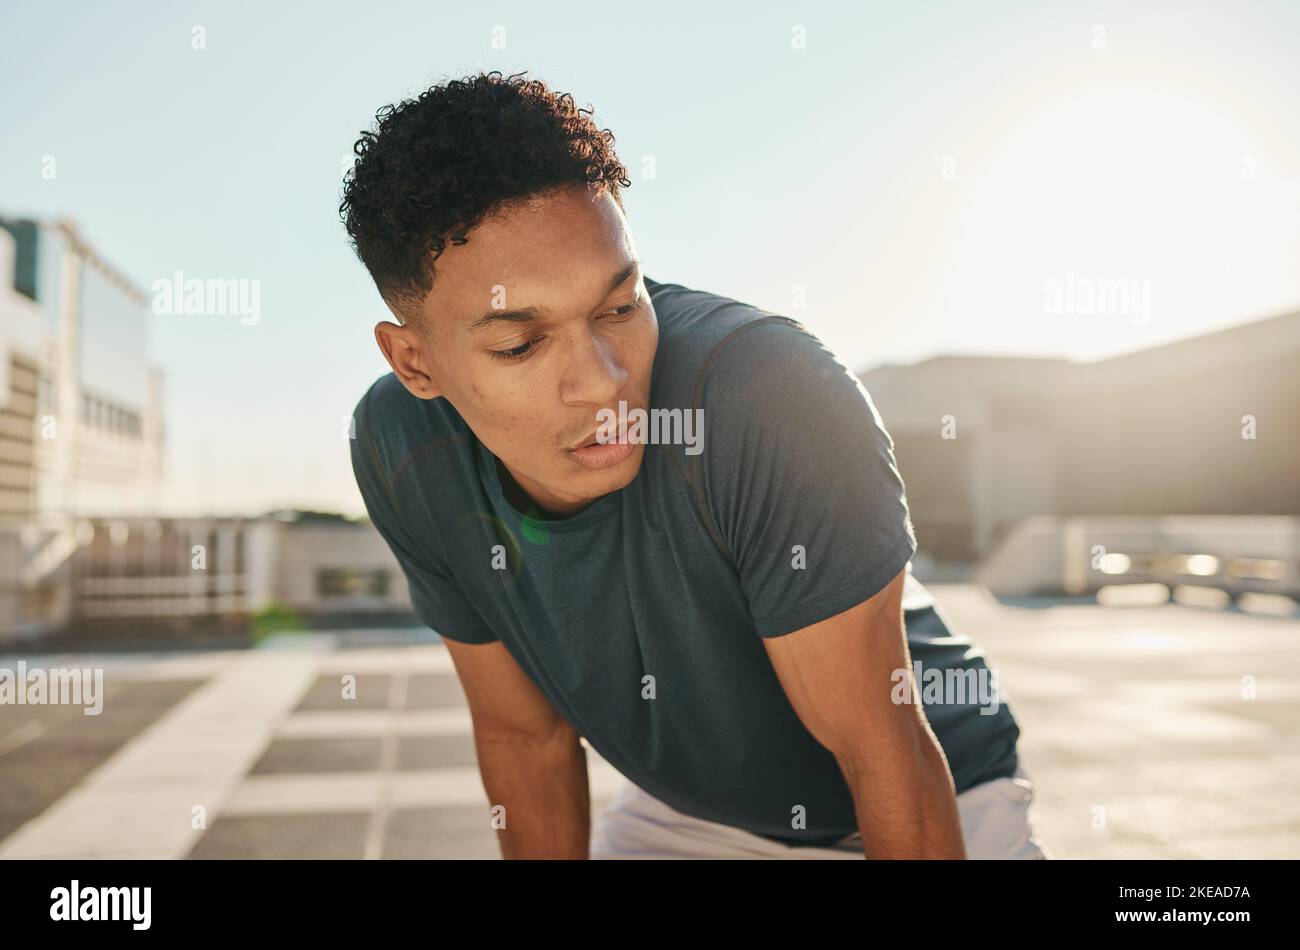 Runner, fitness and tired man in a city fatigue from running exercise, cardio workout or training. Breathing, fatigue and healthy sports athlete Stock Photo